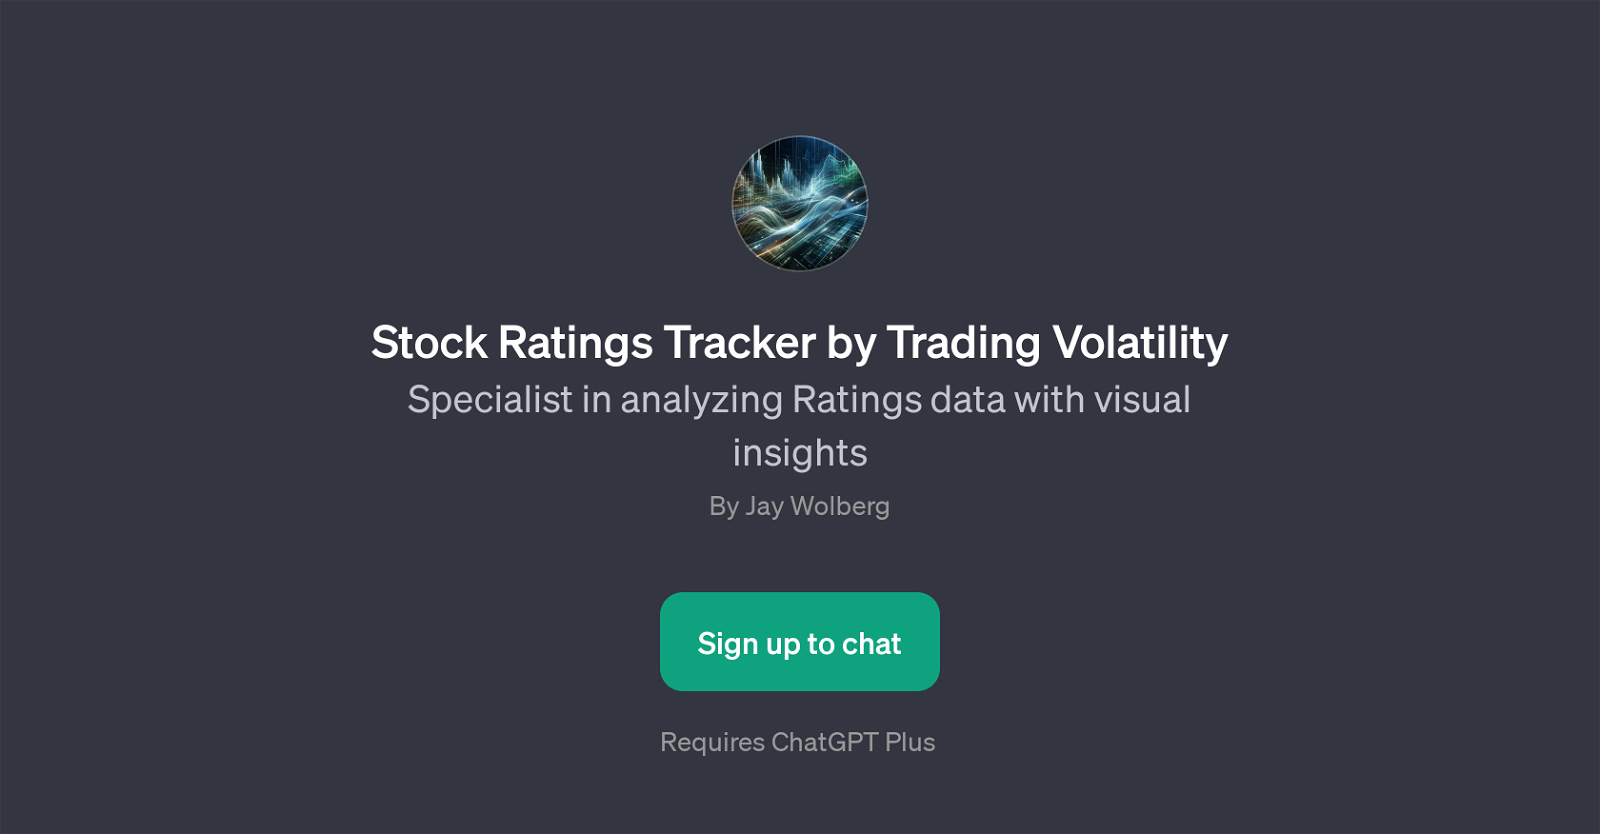 Stock Ratings Tracker by Trading Volatility website